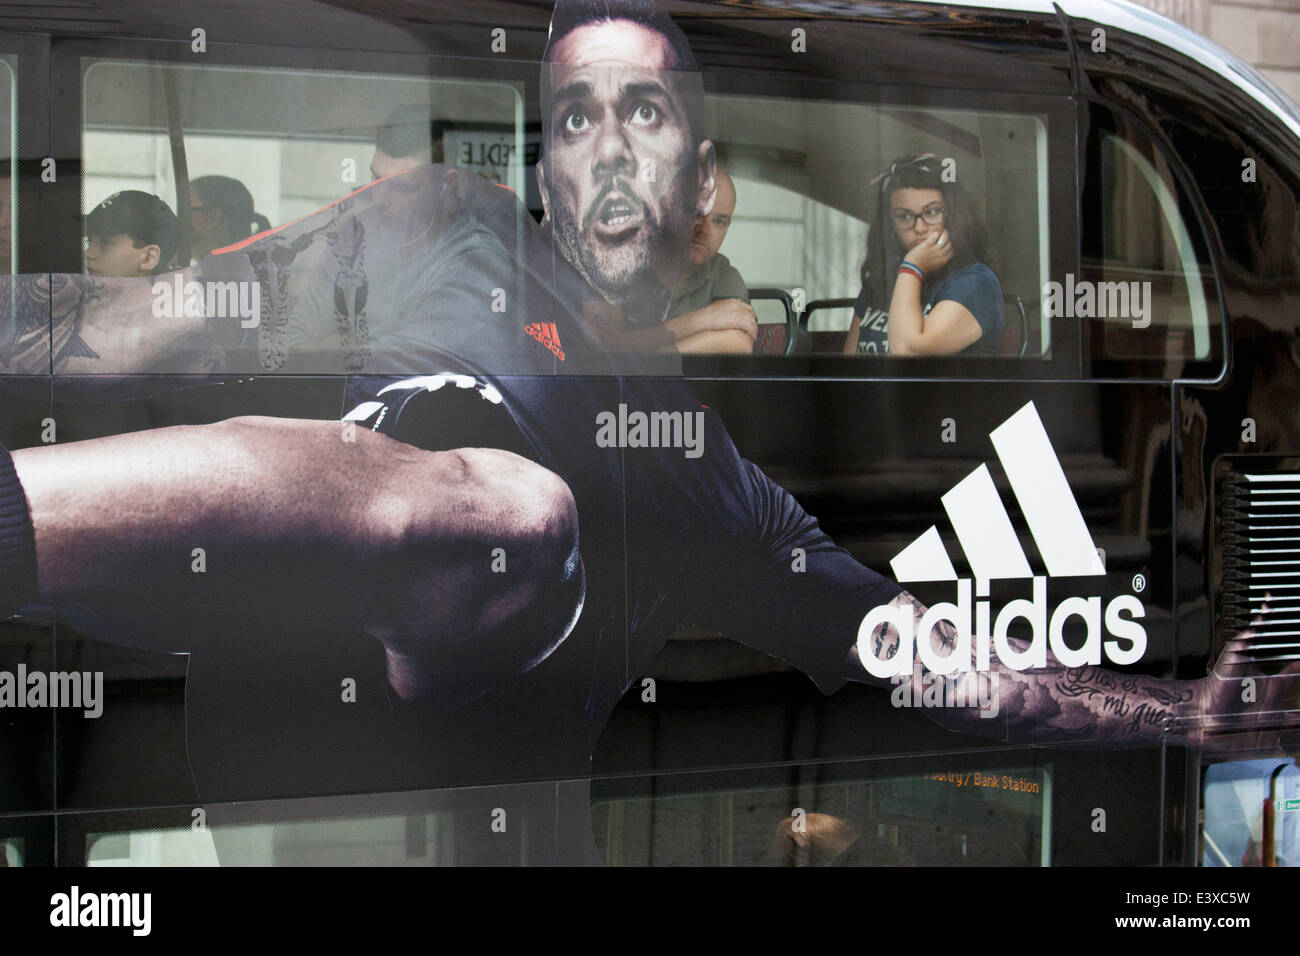 Adidas advert on London bus London UK "all in or nothing" Cup campaign painted on routemaster Photo - Alamy